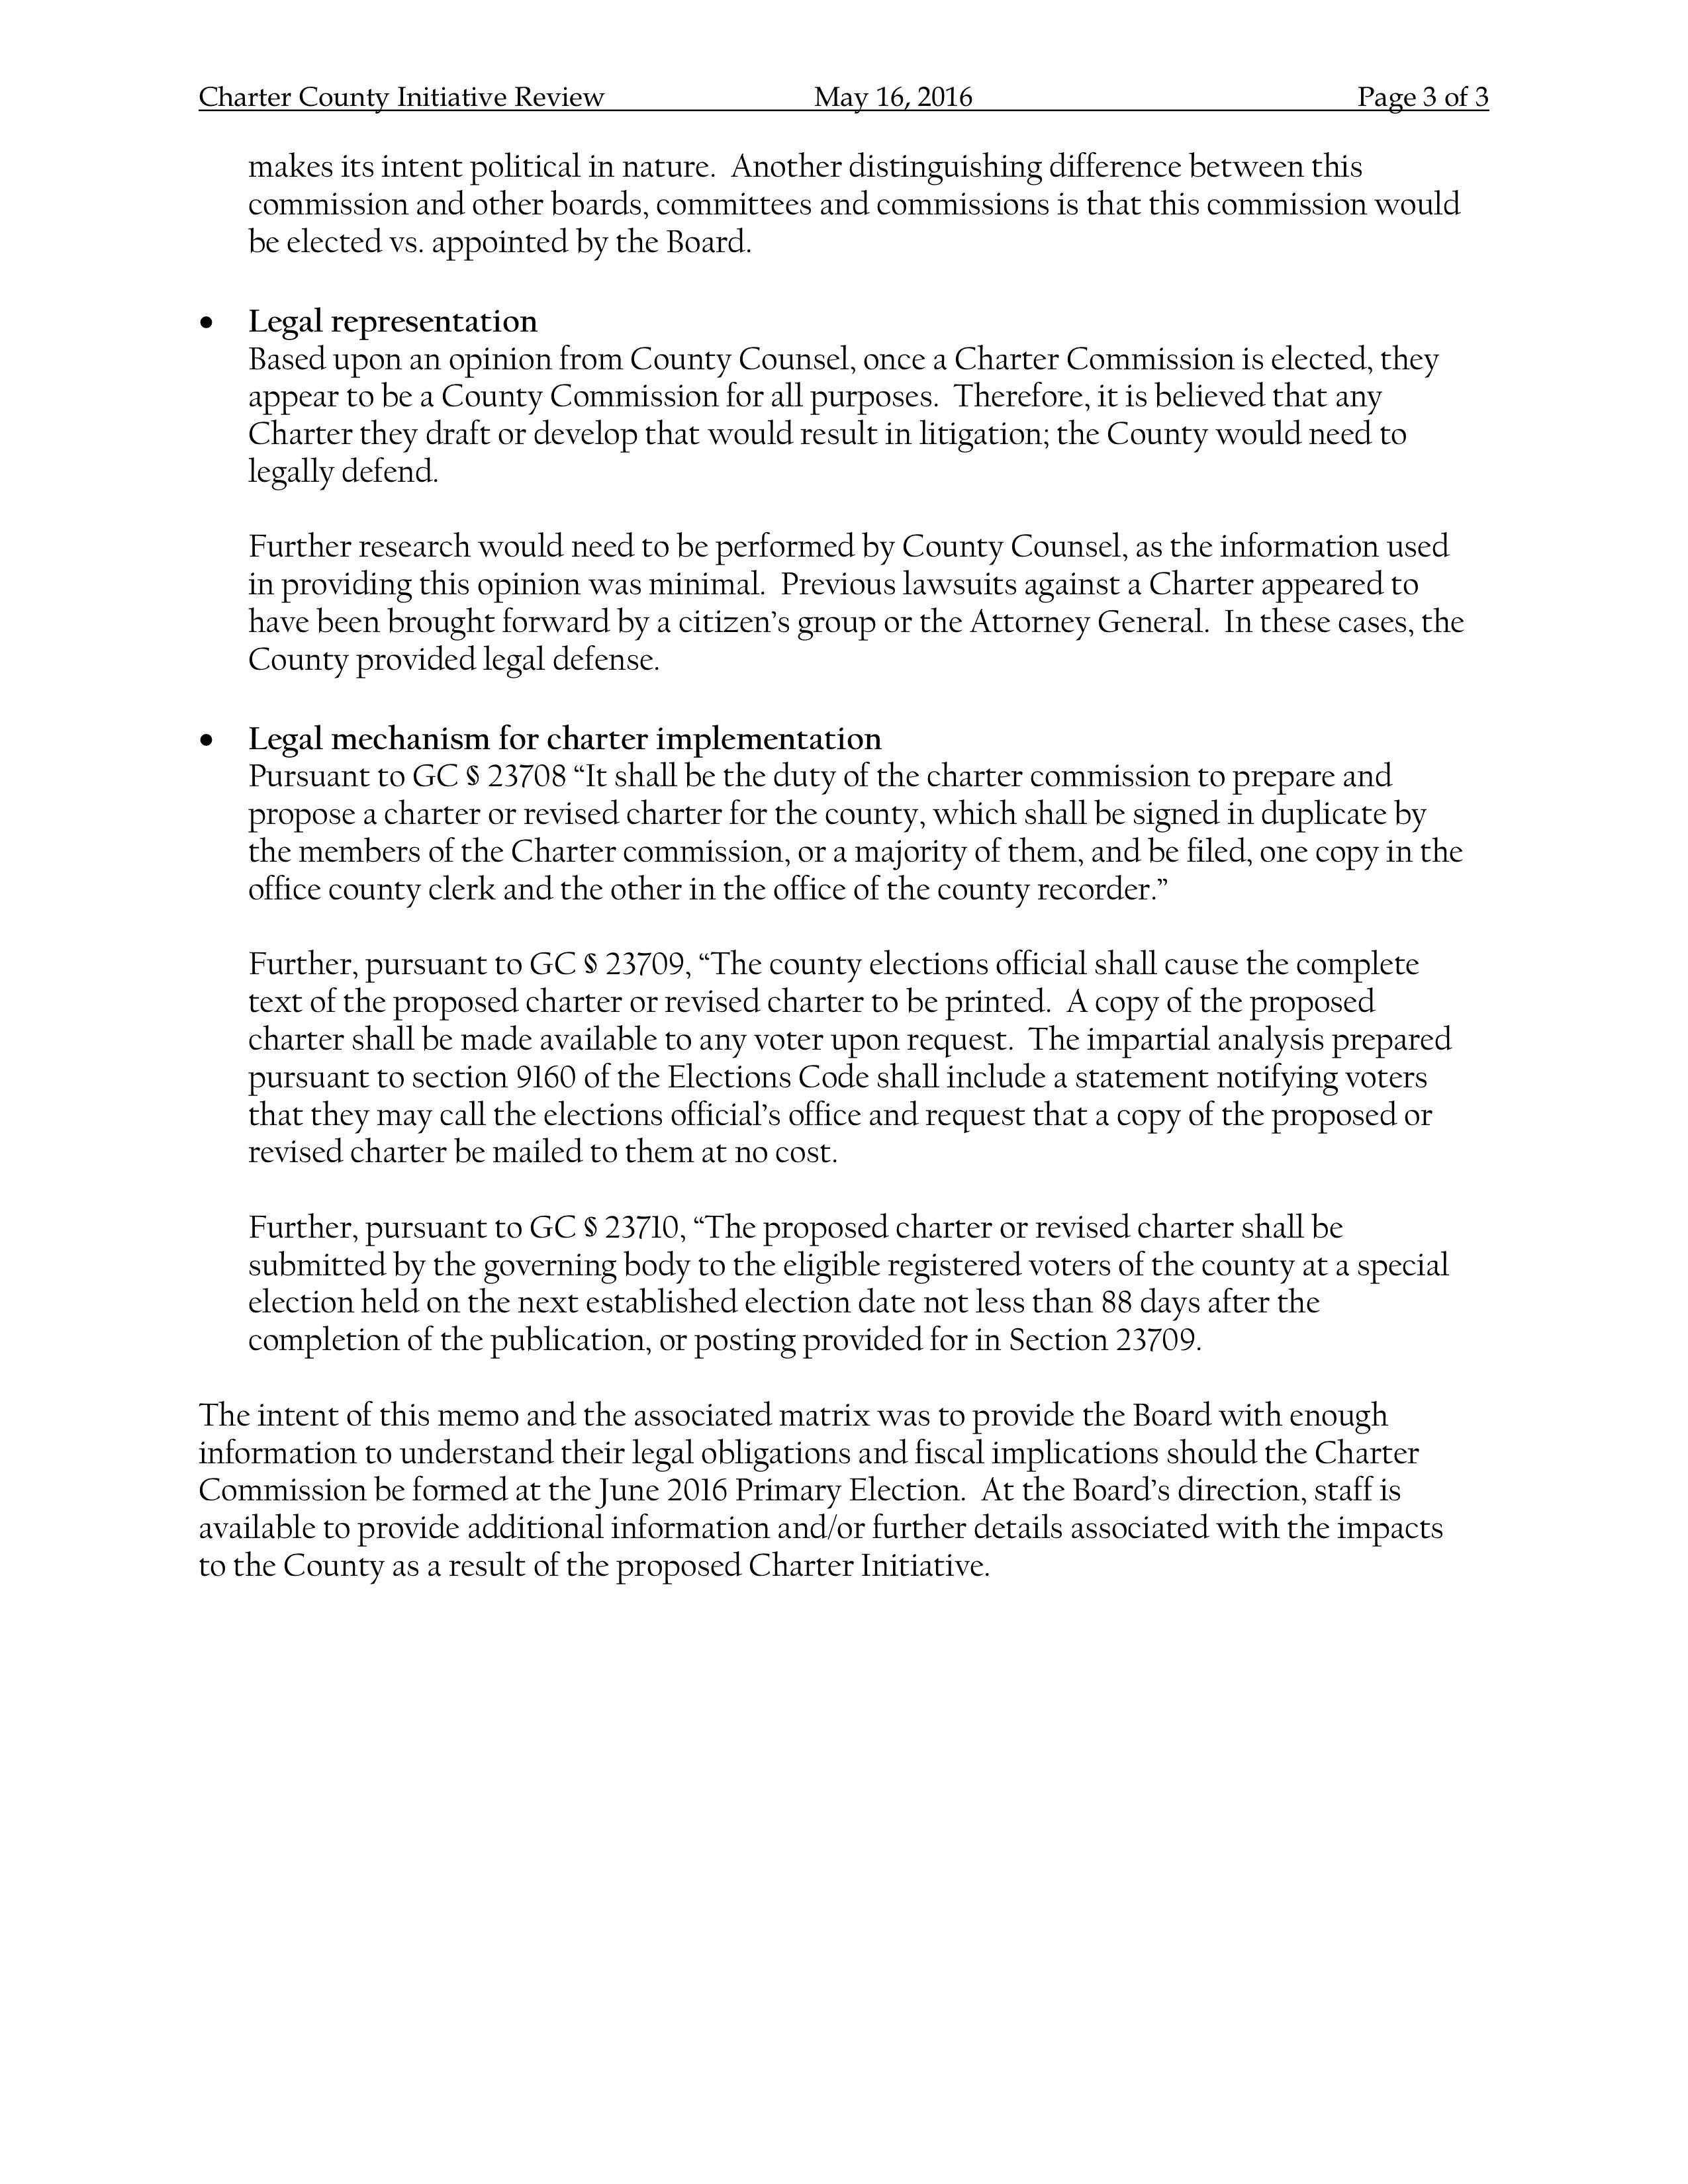 16-05-16 Potential Fiscal Impact of Measure W - P.3